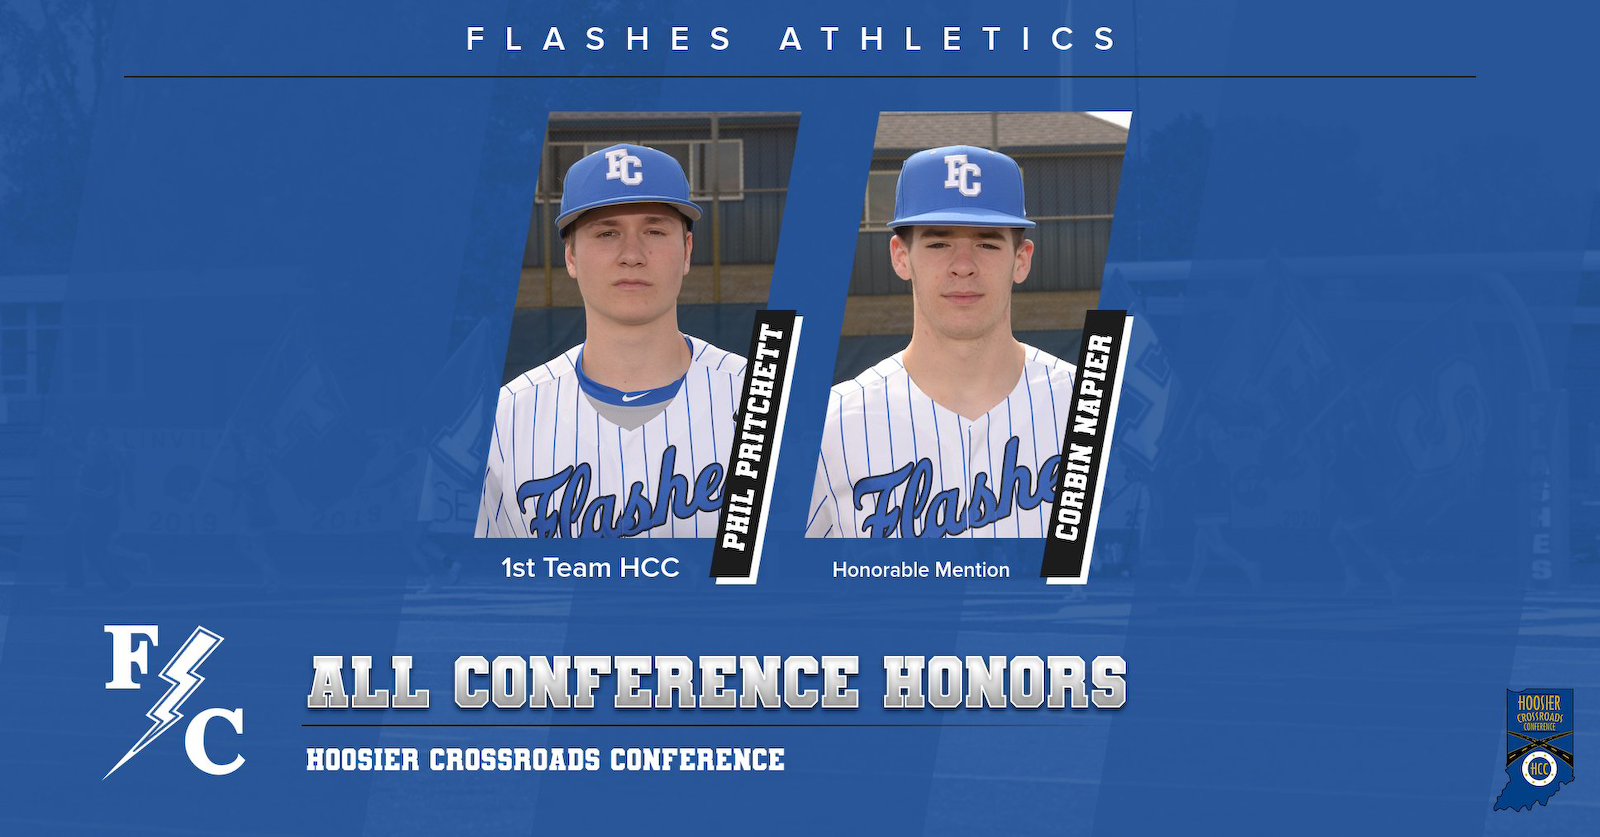 All Conference Baseball Players cover photo